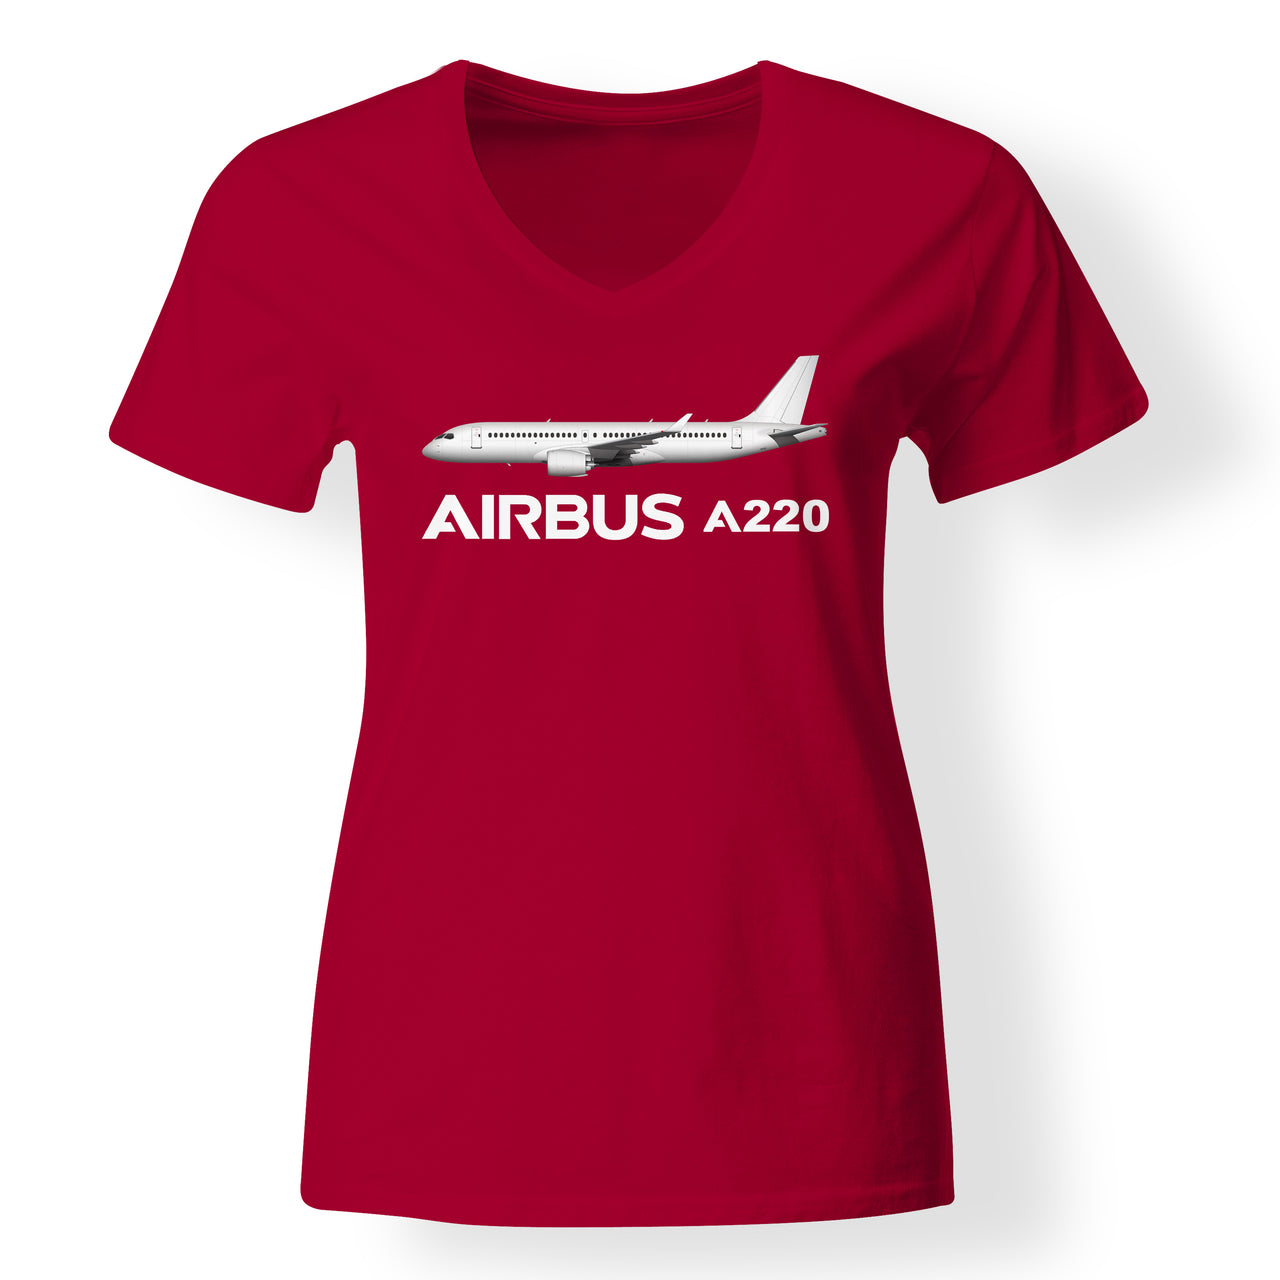 The Airbus A220 Designed V-Neck T-Shirts